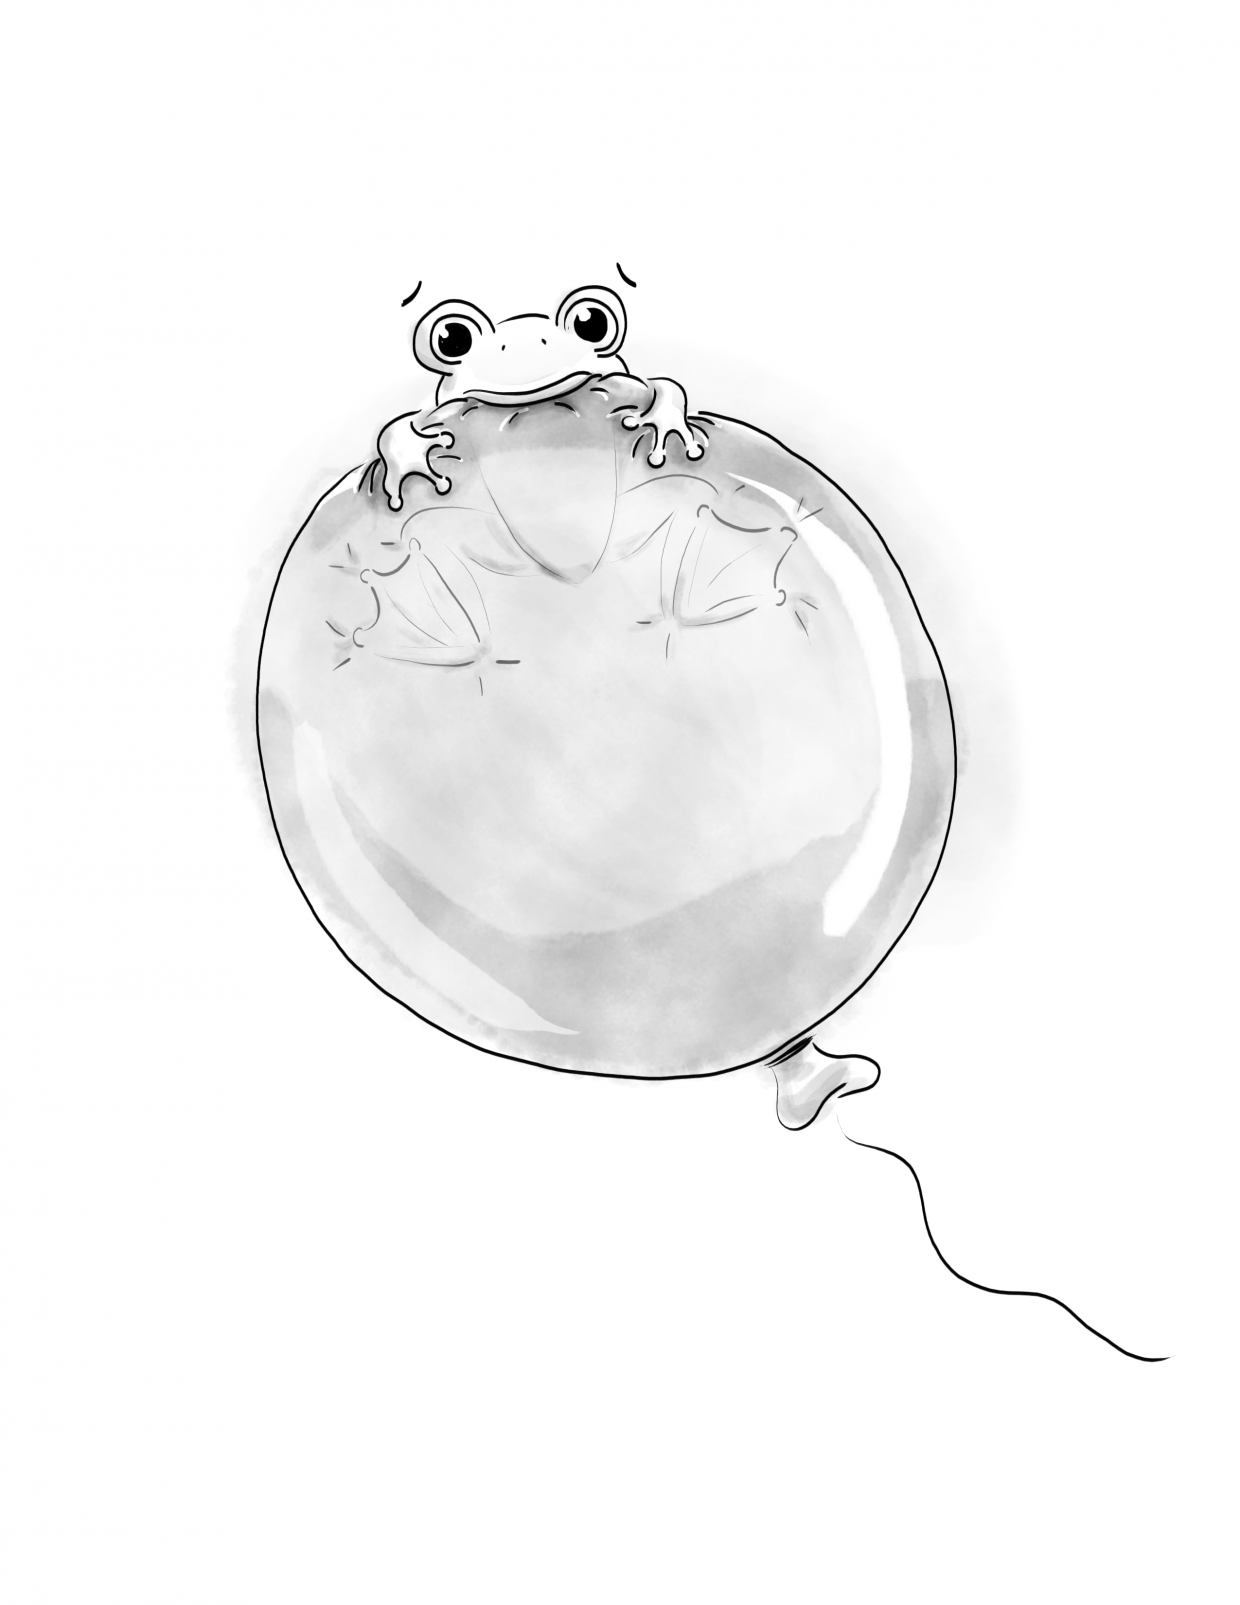 frog floating on a balloon